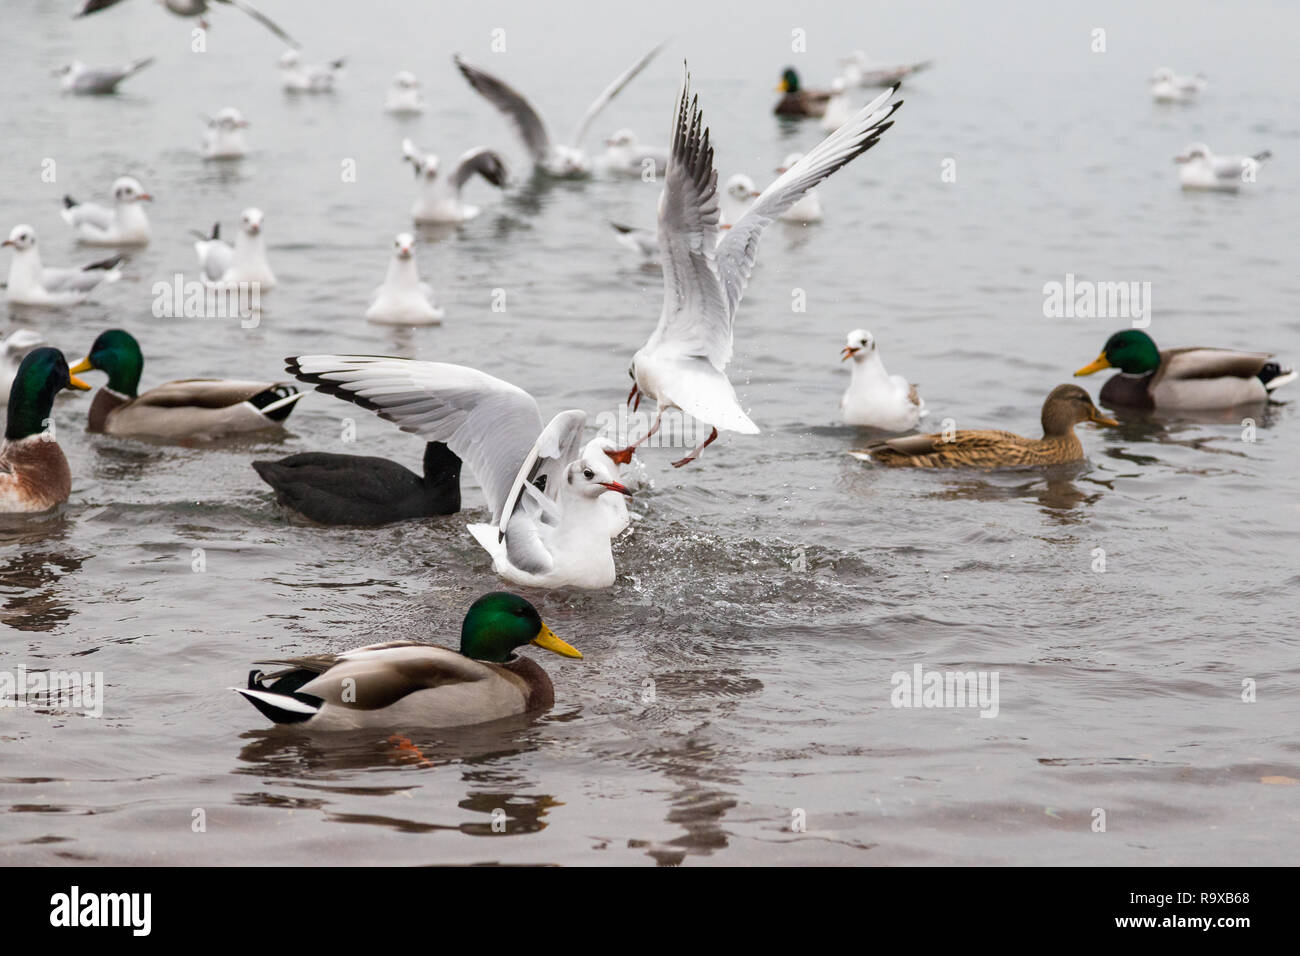 While feeding the ducks, seagulls are competing and fighting among one another for food. Stock Photo